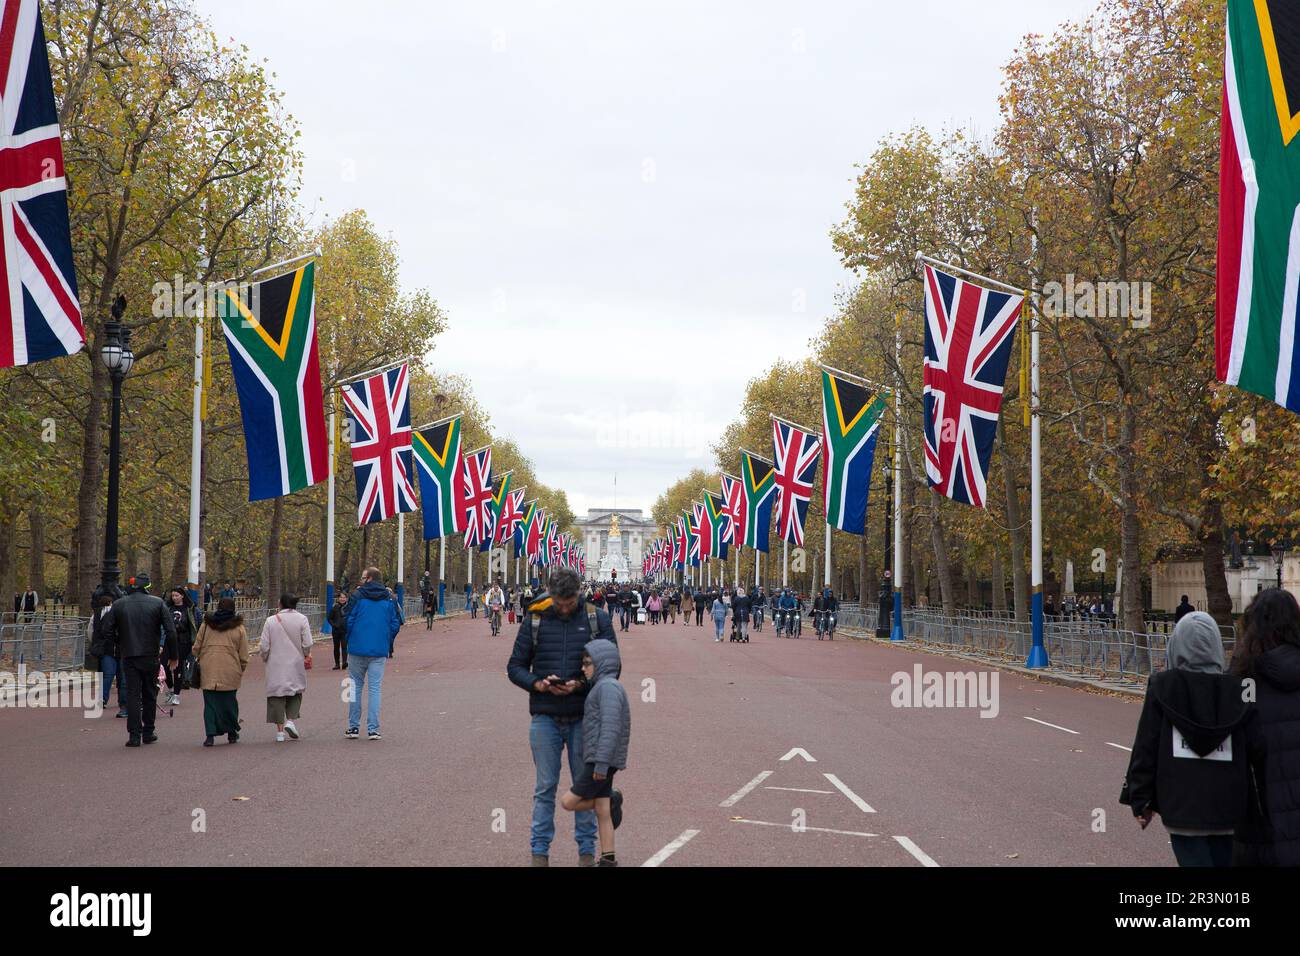 Union flags and flags of South Africa are seen in central London ahead of a state visit of the President of South Africa. Stock Photo